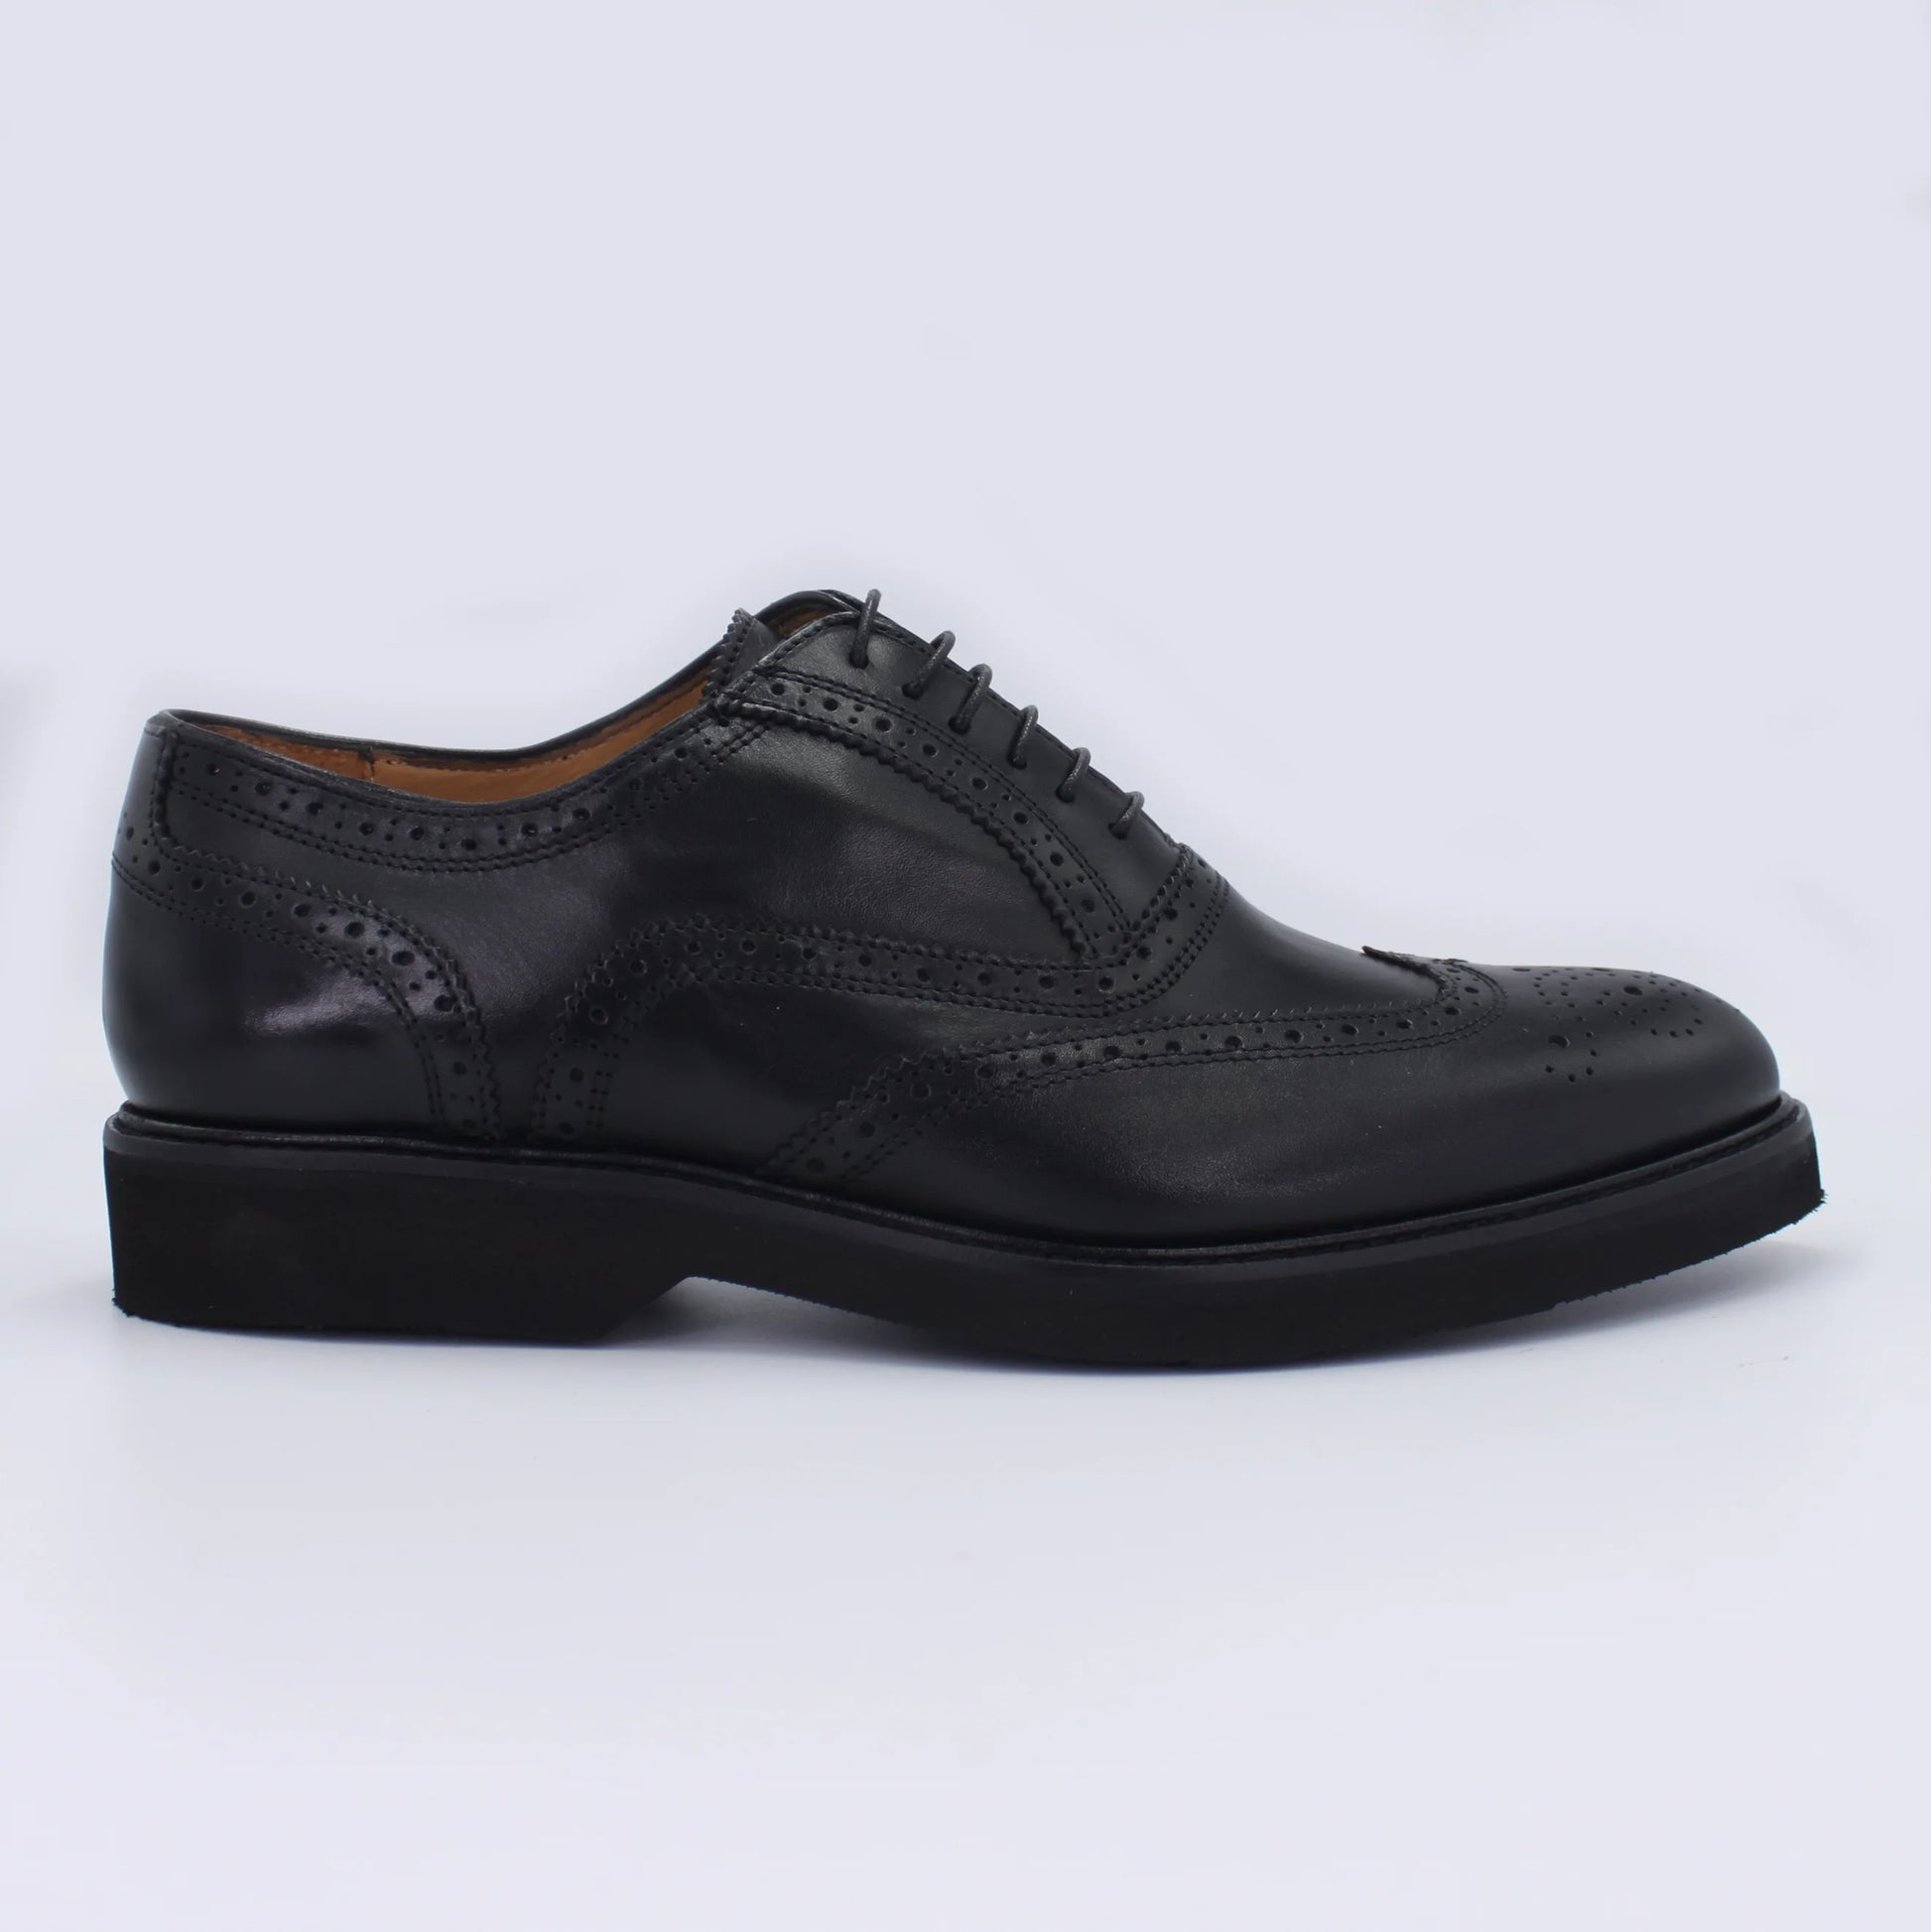 Shop Handmade Italian Leather Oxford Brogue in Black (MF6650) or browse our range of hand-made Italian oxfords & brogues for men in leather or suede in-store at Aliverti Durban or Cape Town, or shop online. We deliver in South Africa & offer multiple payment plans as well as accept multiple safe & secure payment methods.